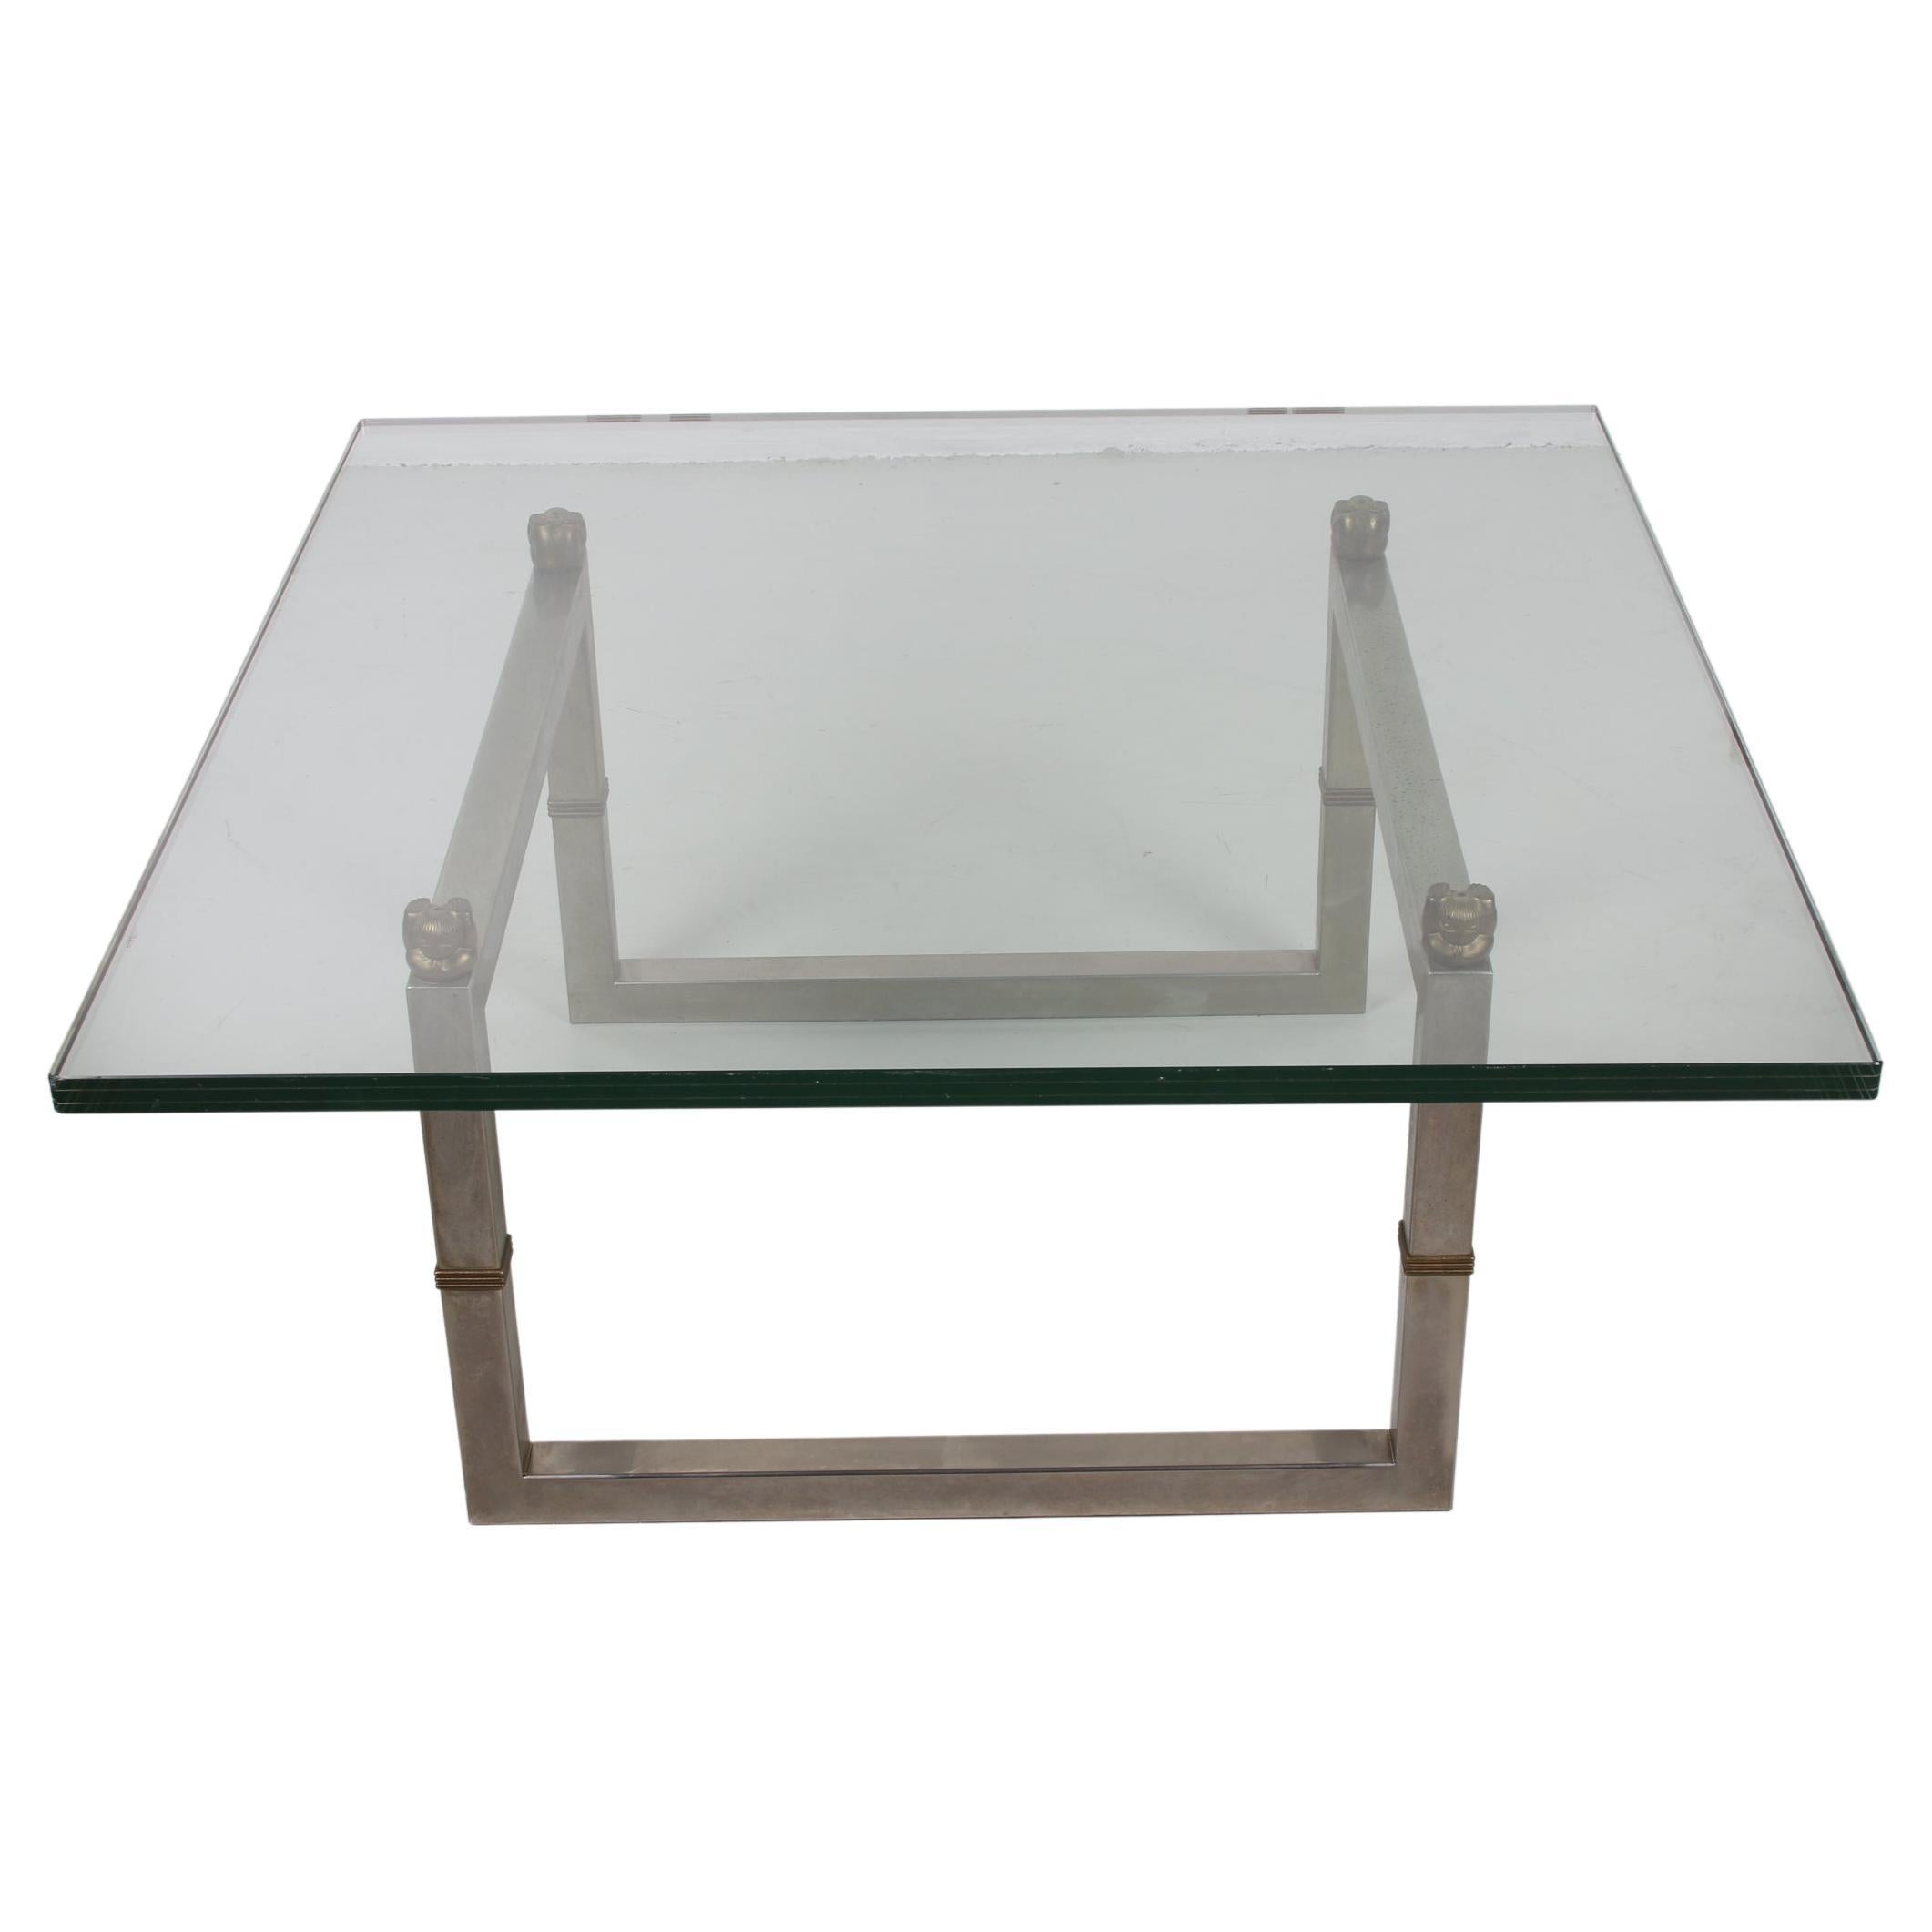 Peter Ghyczy Glass Coffee Table with Stainless Steel Frame Biri T29